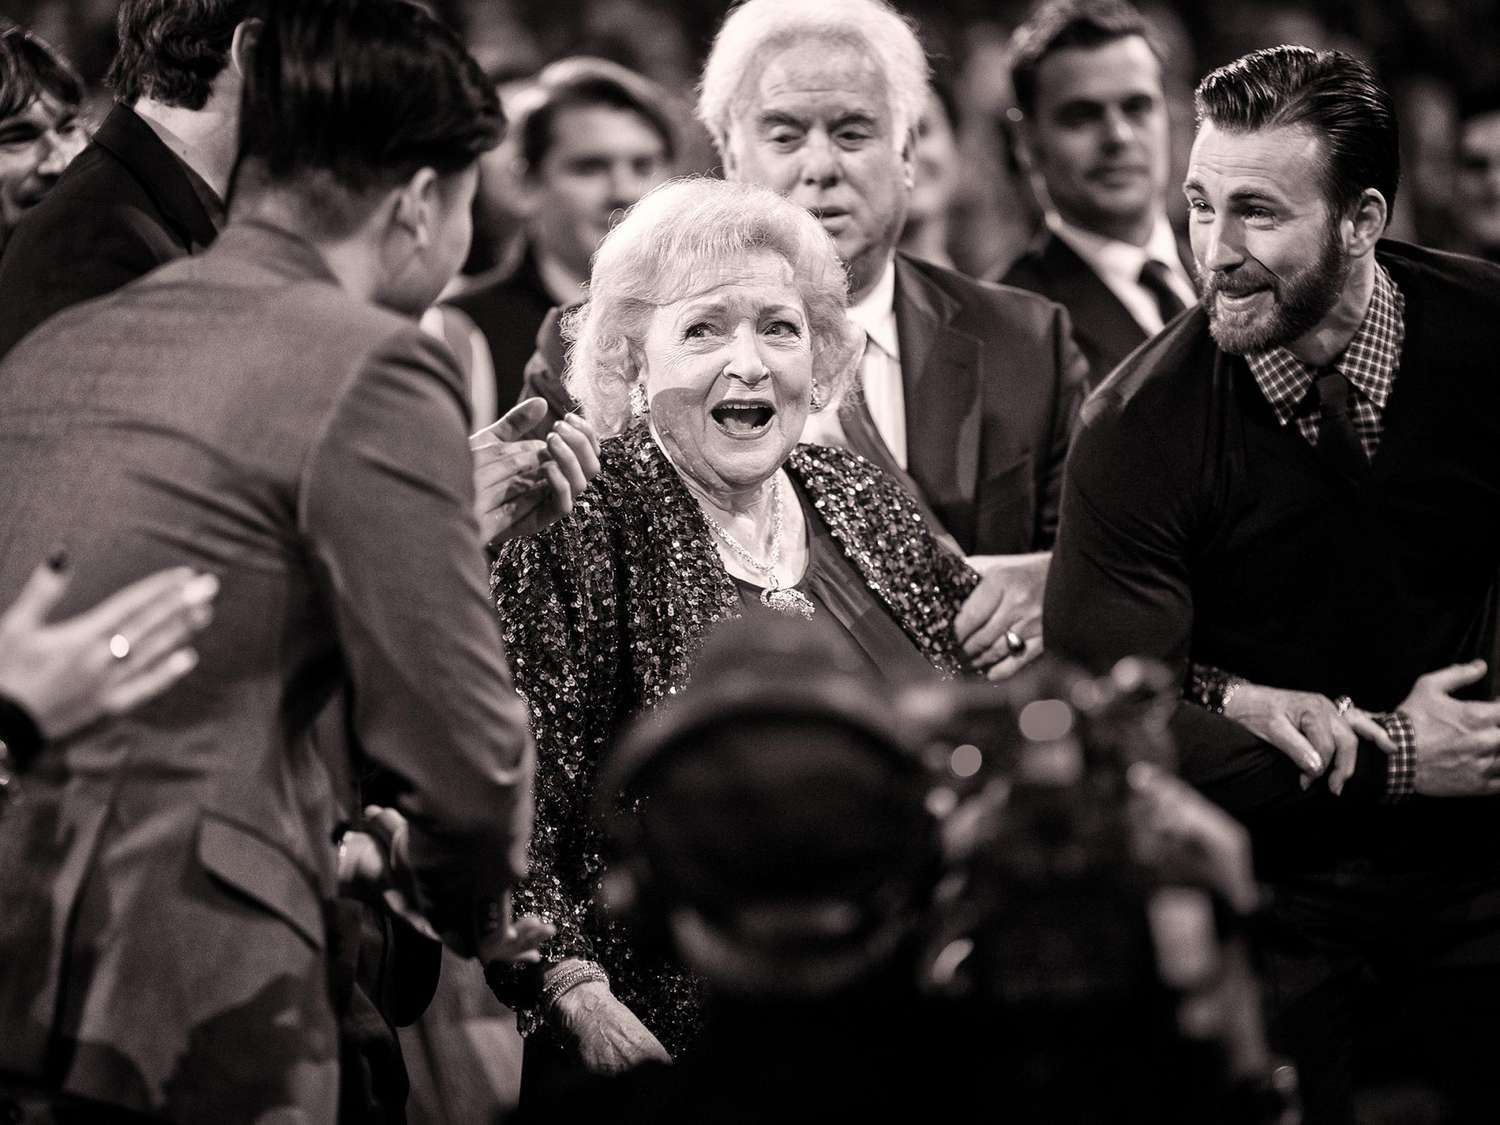 Betty White at the 41st annual People's Choice Awards in Los Angeles on Jan. 7, 2015